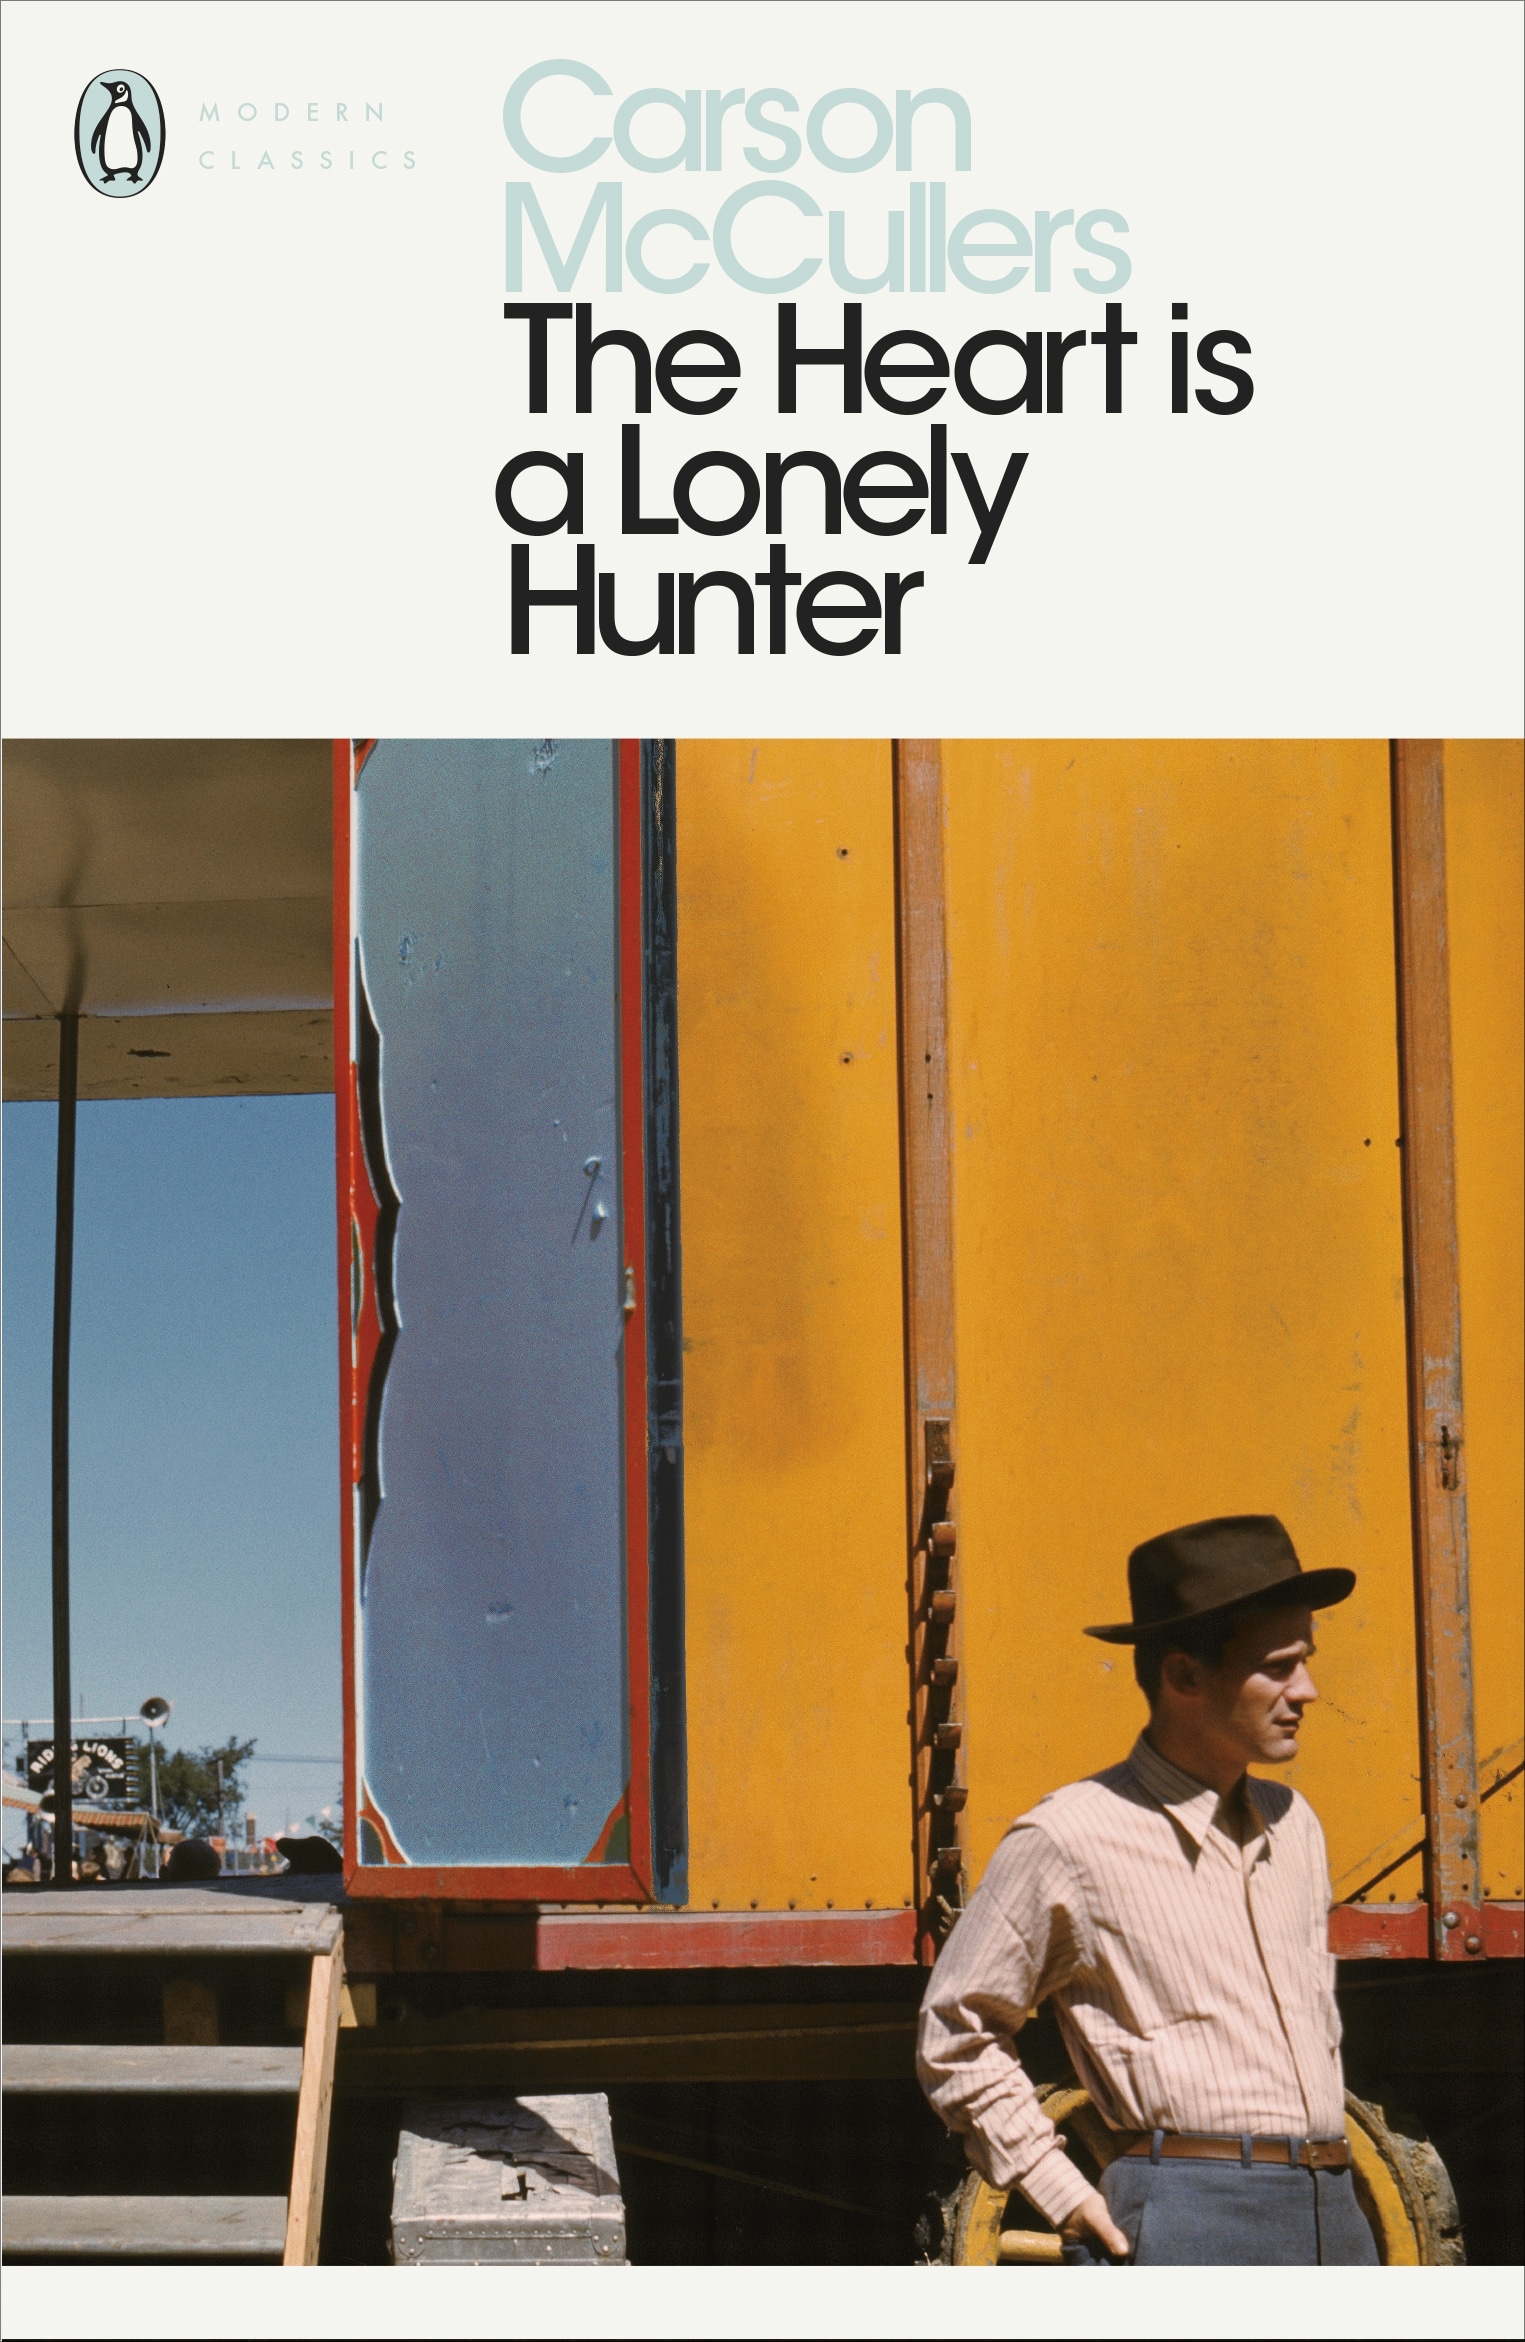 Book “The Heart is a Lonely Hunter” by Carson McCullers — August 31, 2000